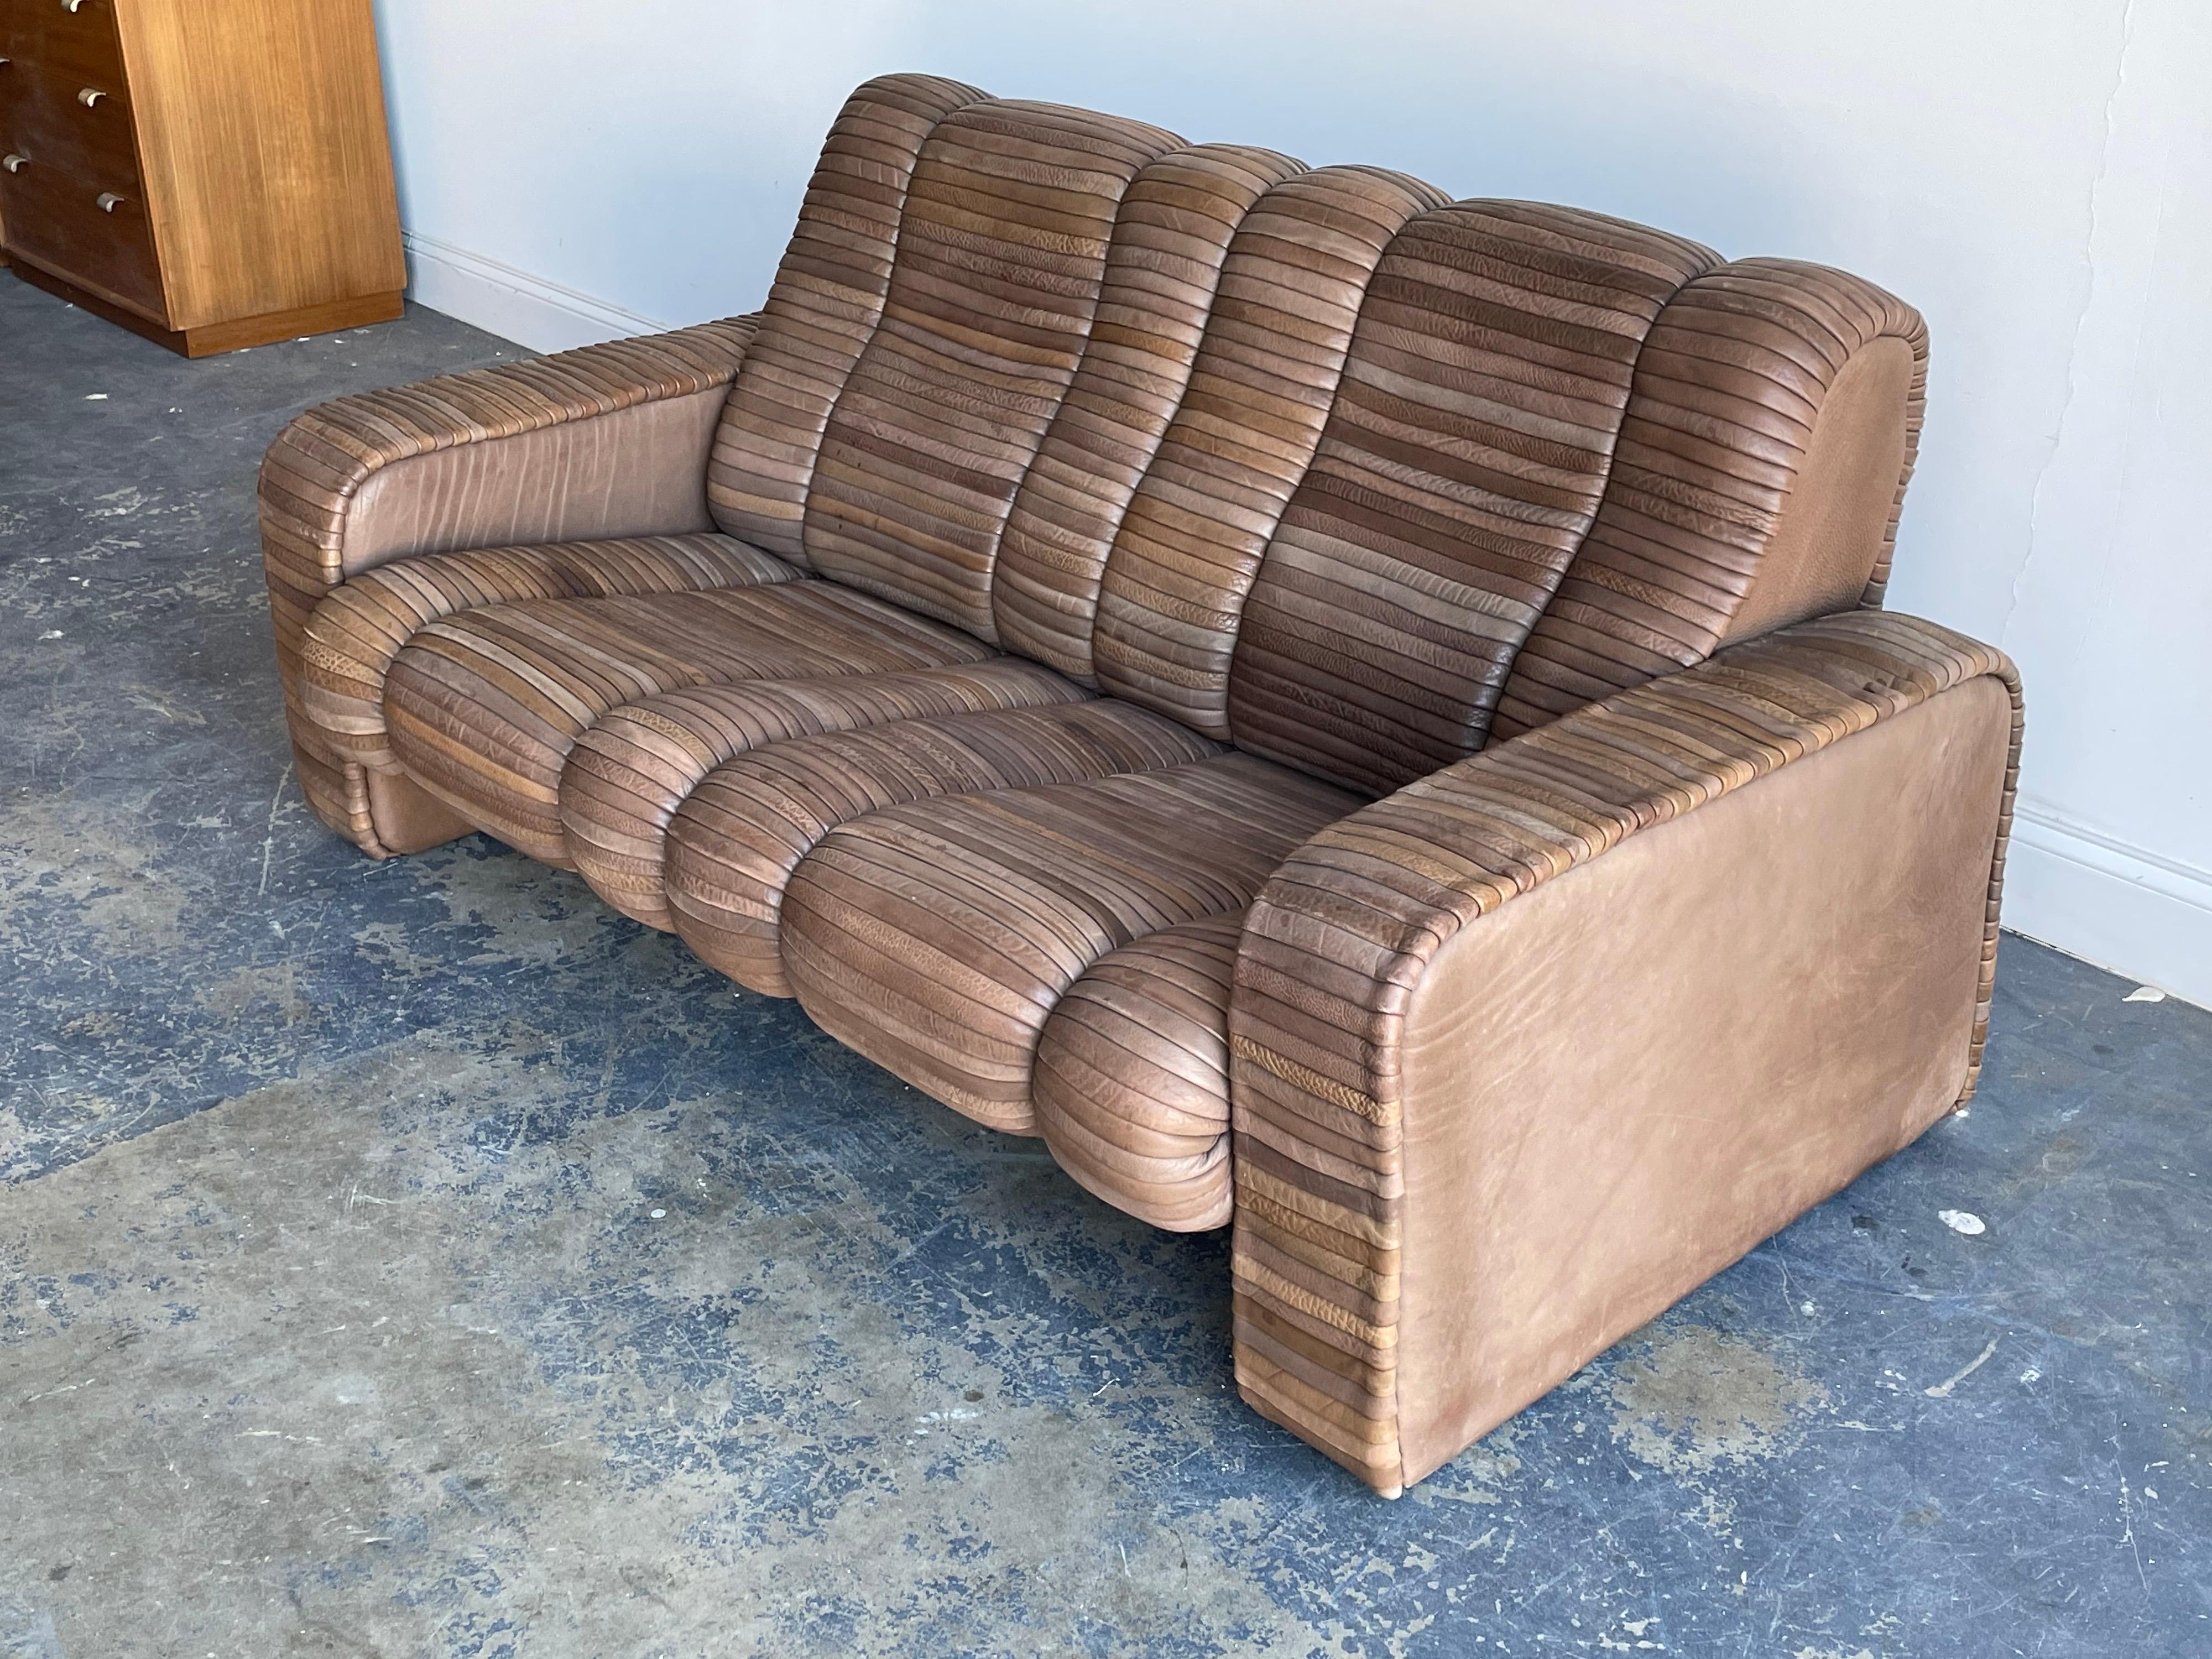 Swiss Leather Patchwork Sofa by Ernst Lüthy, Founder of De Sede, Switzerland, 1960's